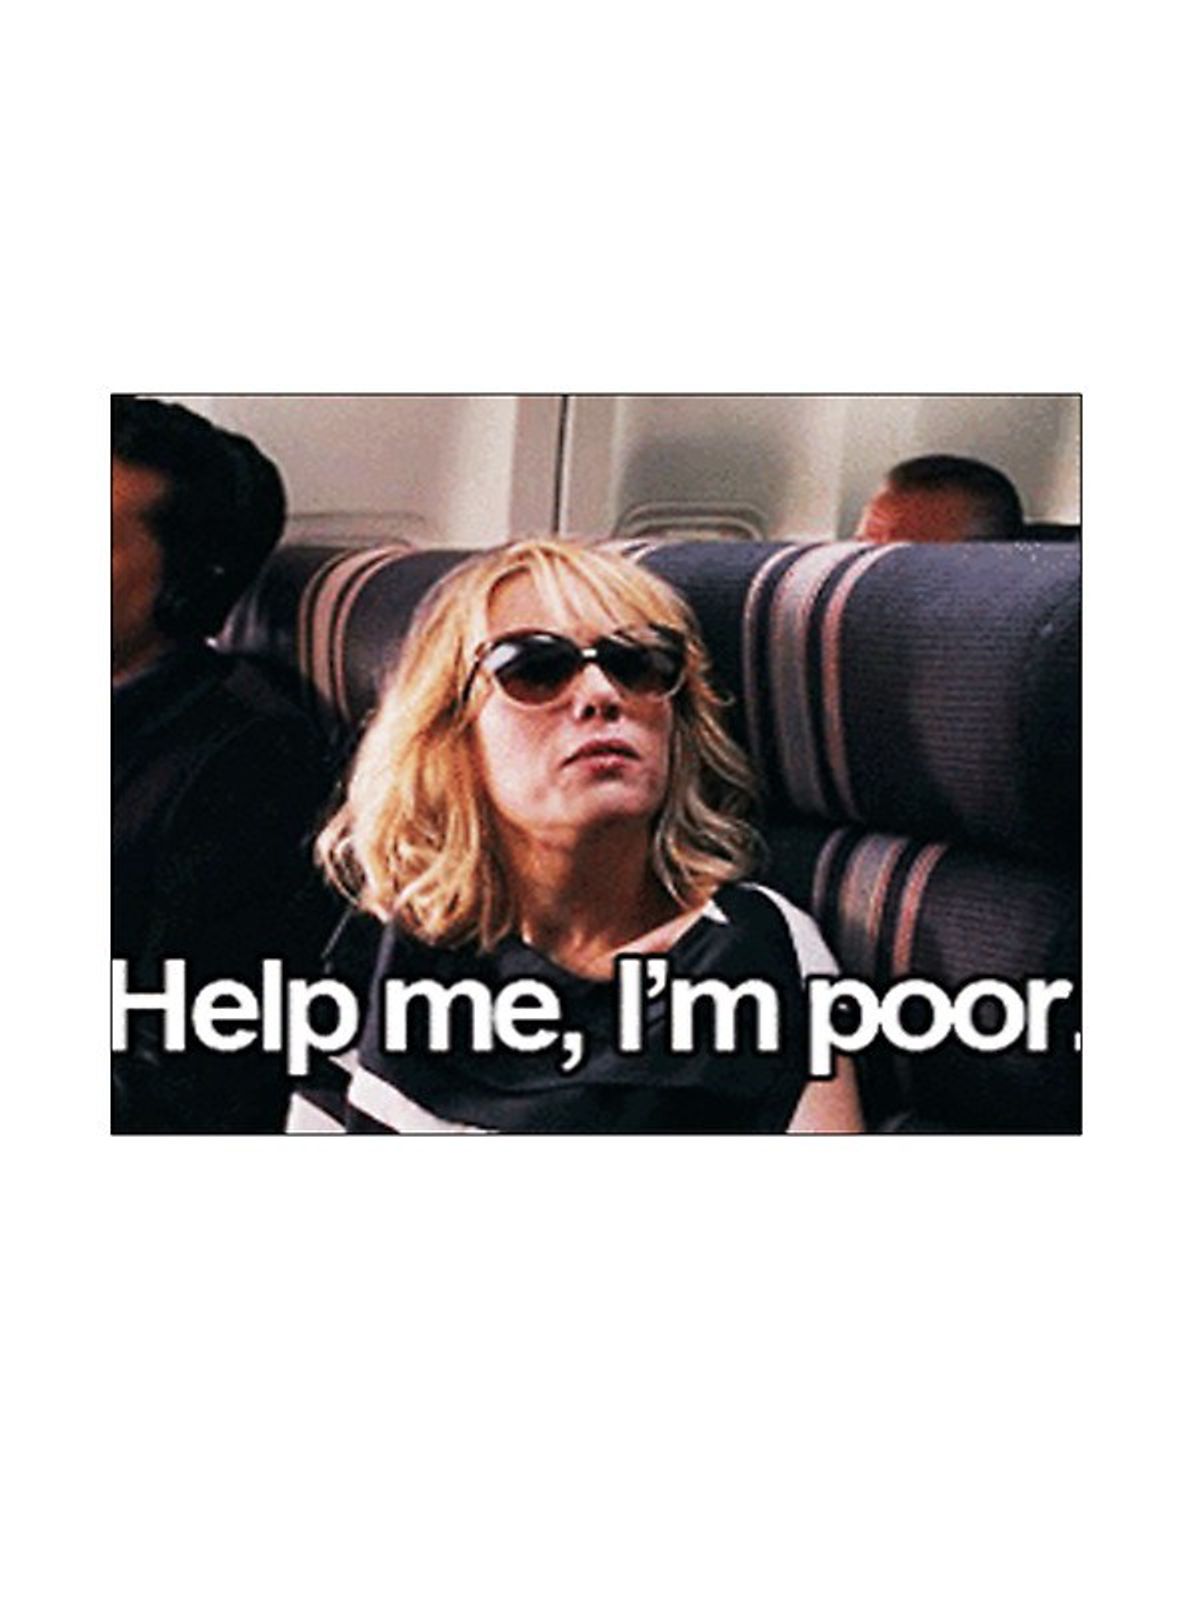 6 Things To Do As A Broke College Student